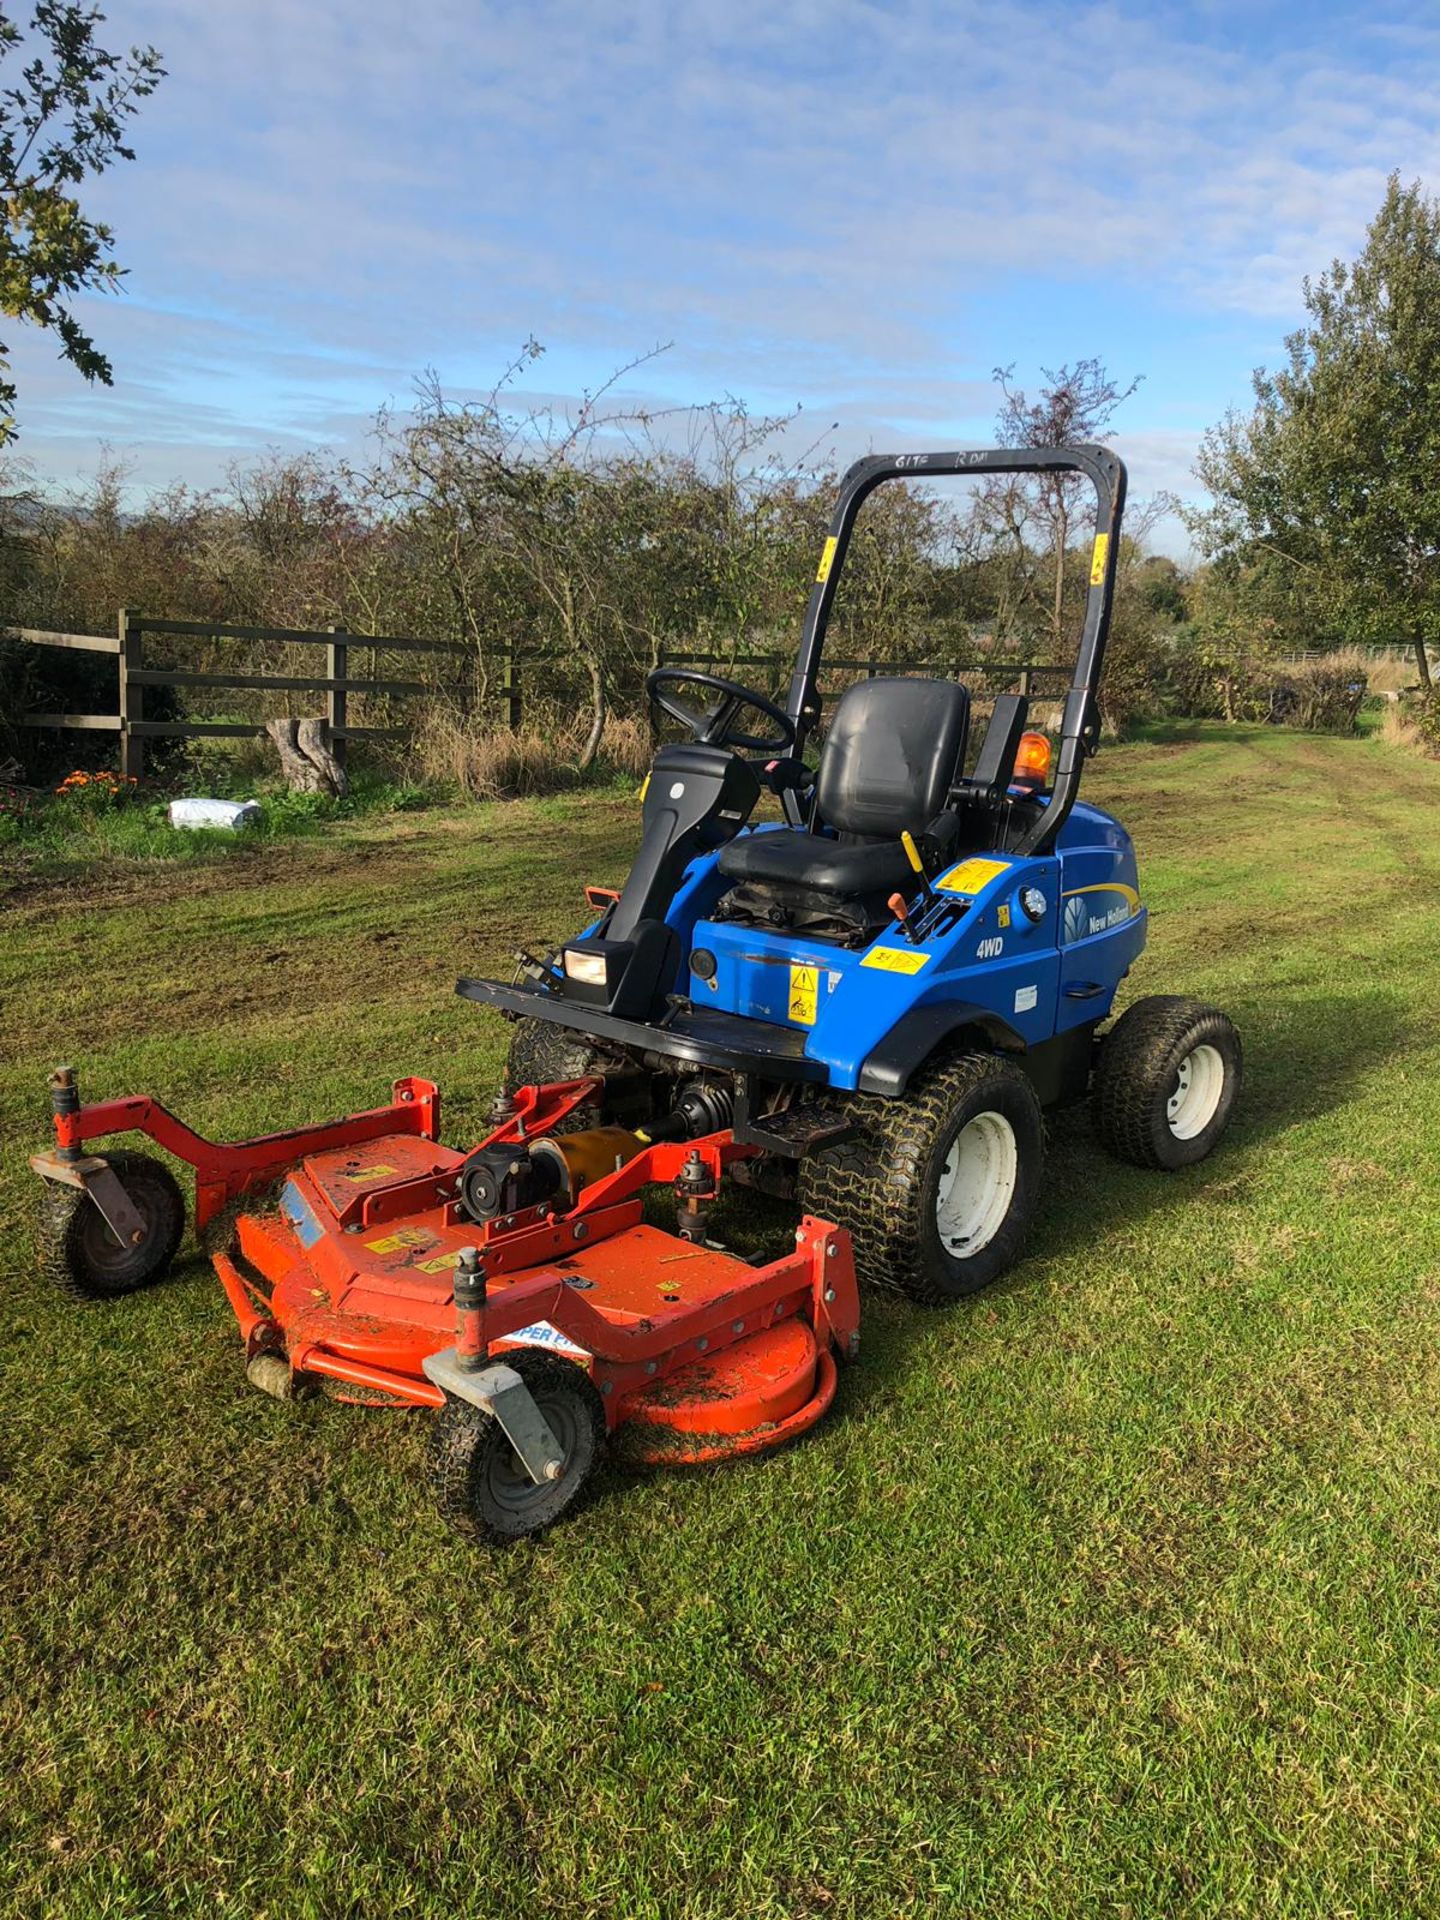 2010/60 REG NEW HOLLAND MC35 4WD RIDE ON LAWN MOWER LOW HOURS *PLUS VAT* - Image 6 of 21